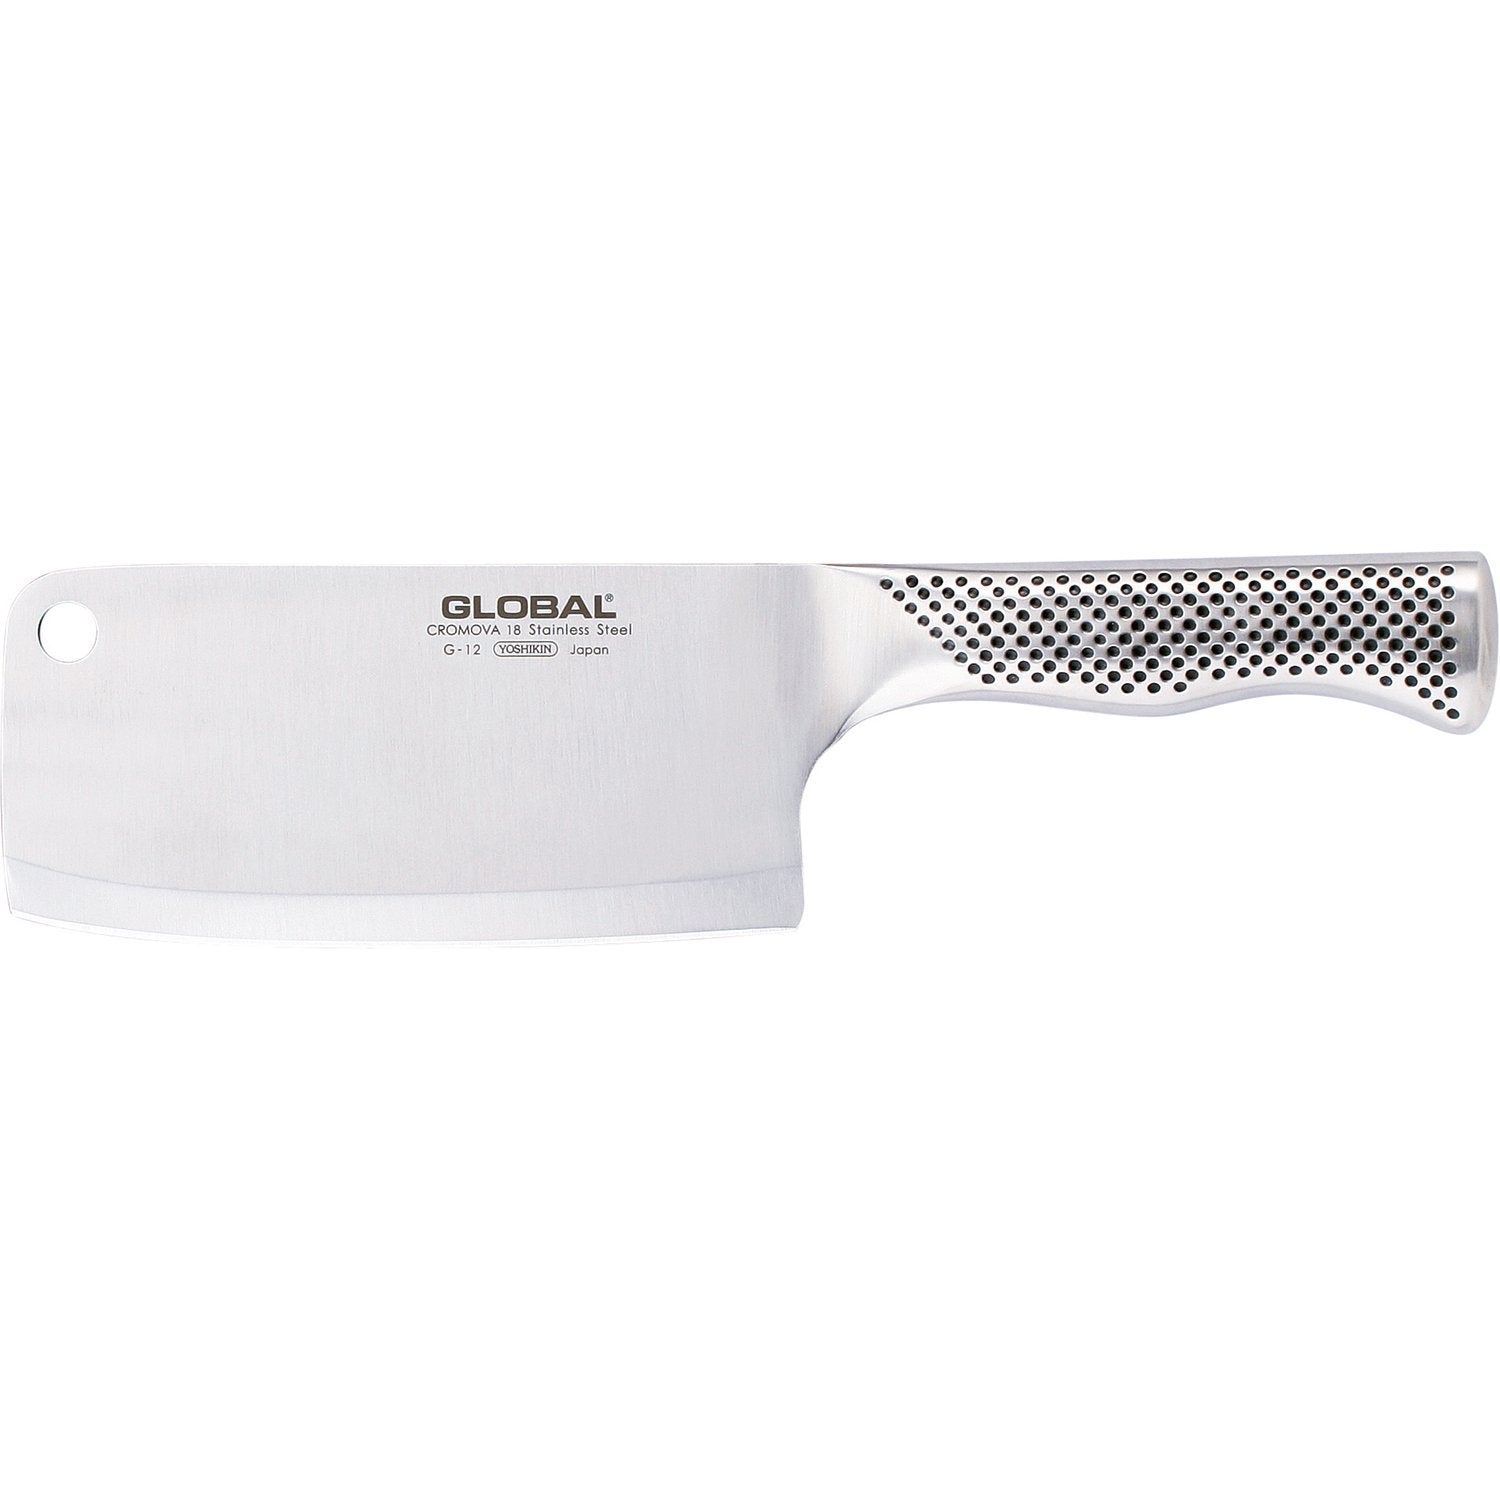 Global G 12 Meat Ax, 16 cm